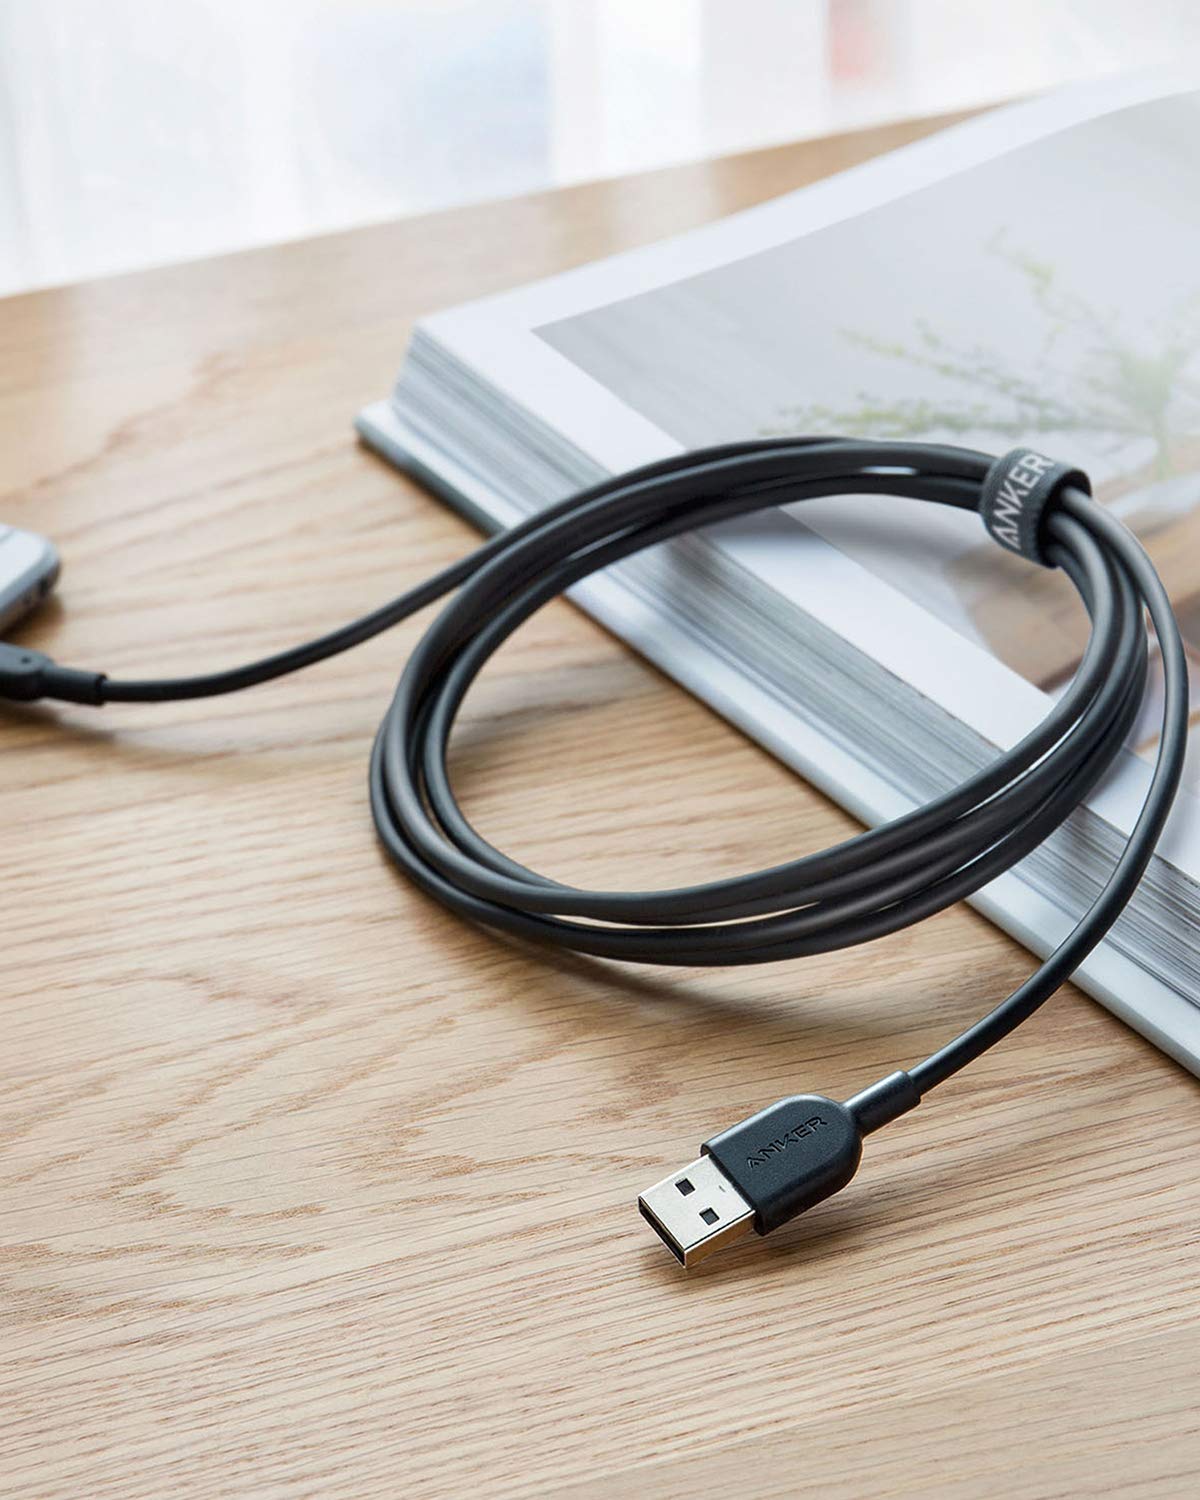 Anker 321 USB-A to Lightning Cable (3 ft 3-in-1)